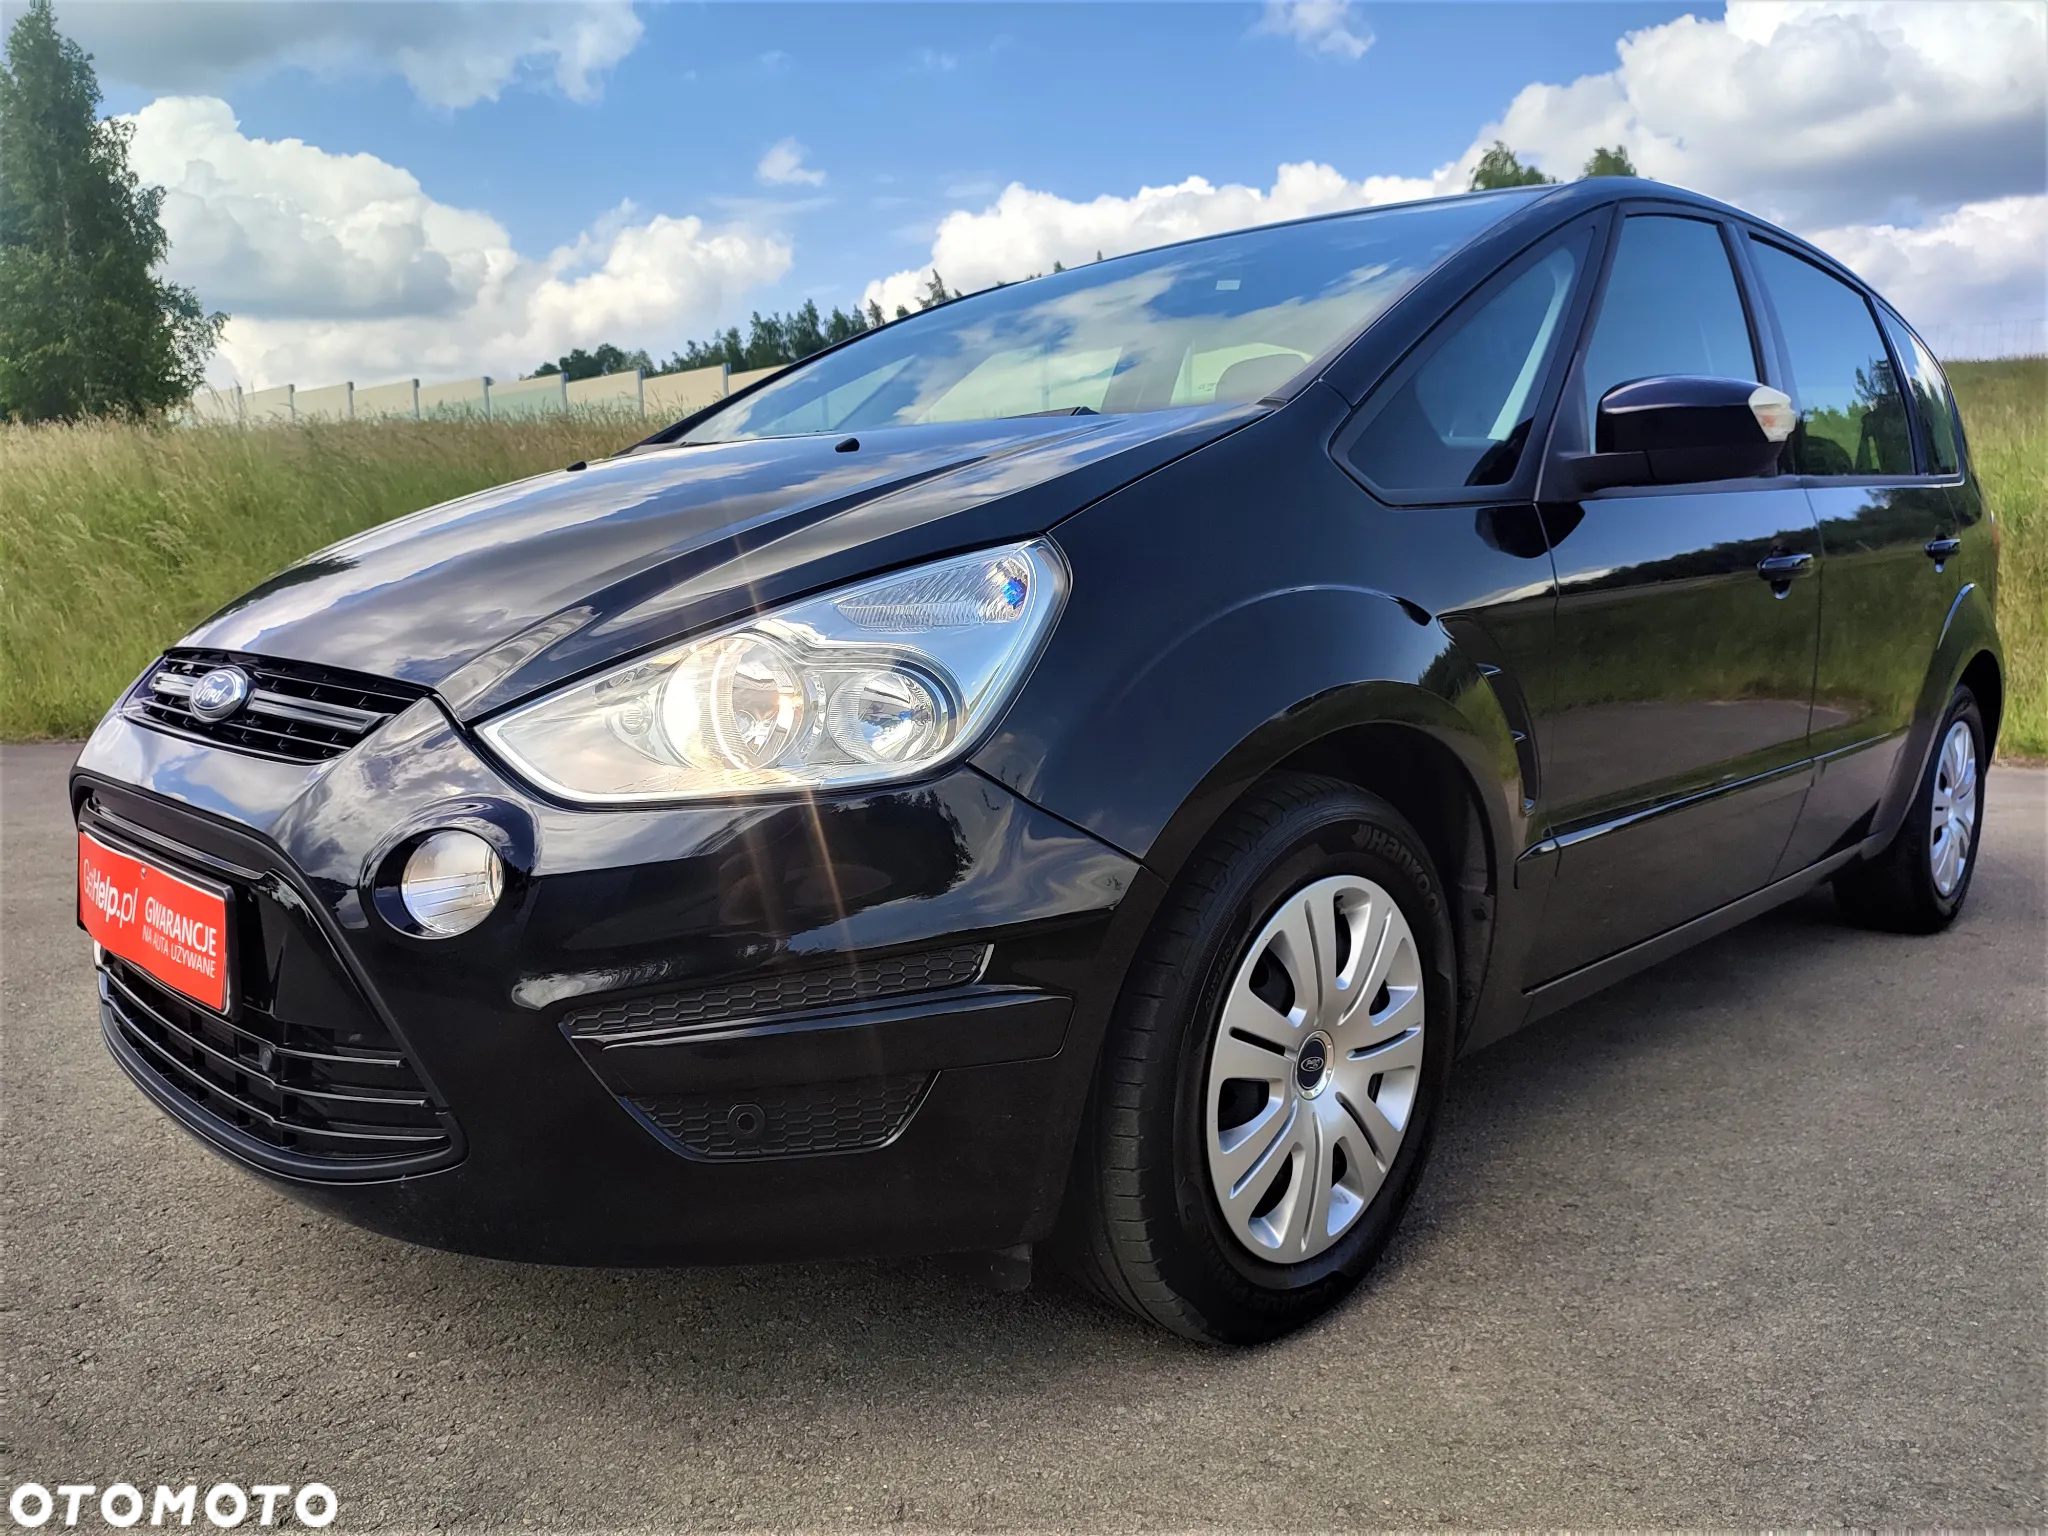 Ford S-Max 2.0 TDCi DPF Business Edition - 8